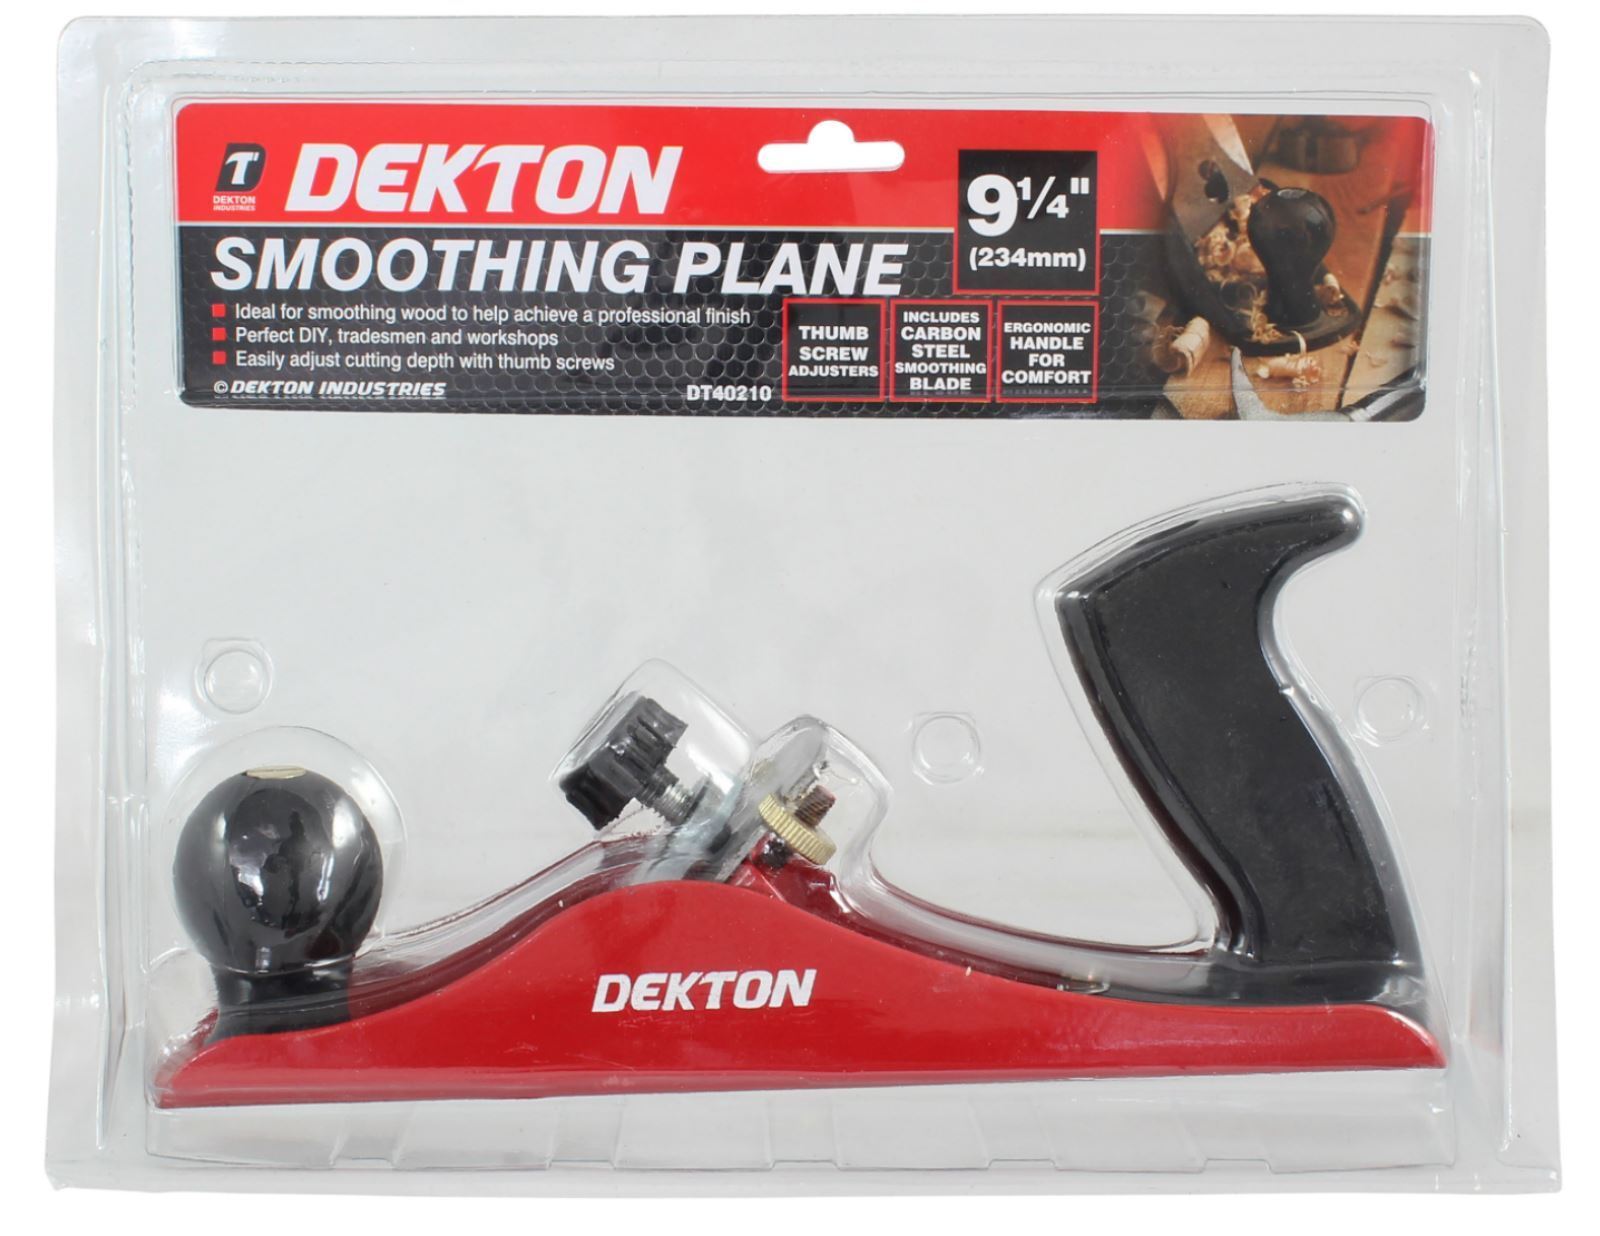 Dekton Smoothing Plane 230mm Planer For Wood Smoothes Doors & Timber 9" DT40210